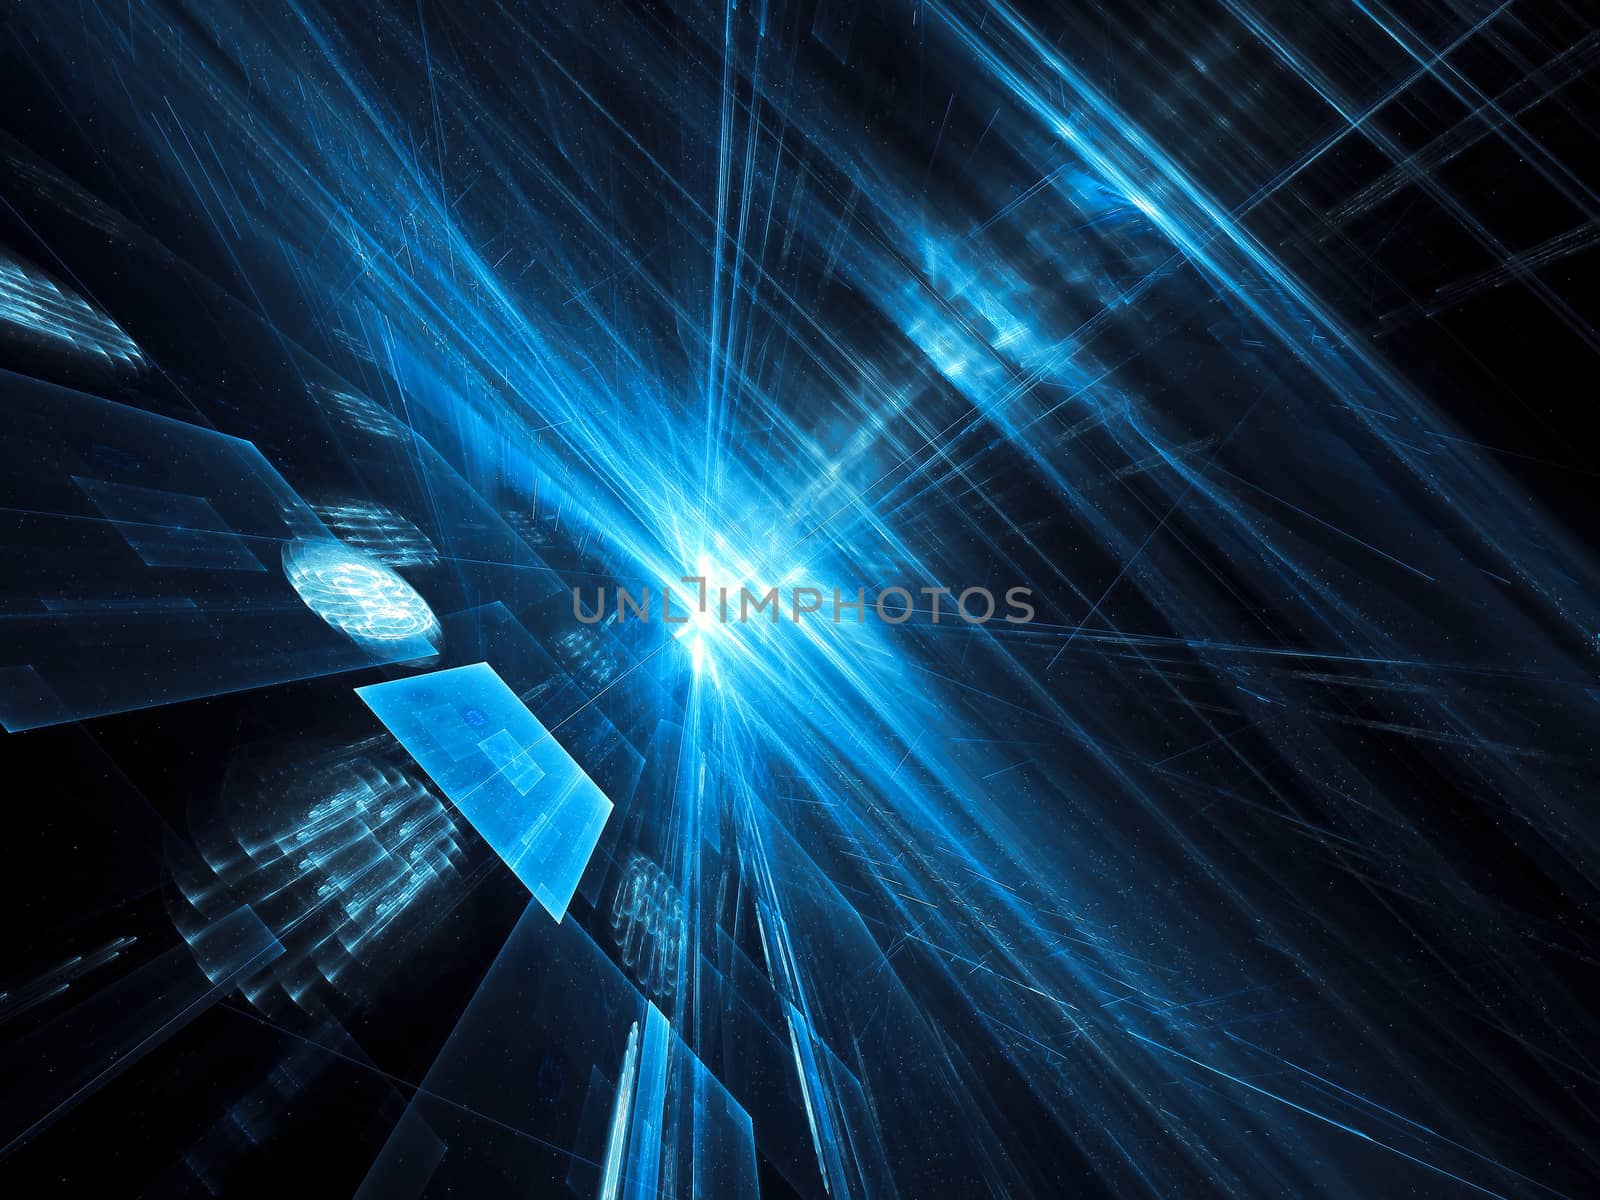 Sci-fi, technology or data science background - abstract computer-generated image. Fractal art: rays of light and perspective way. For web design, covers, posters.